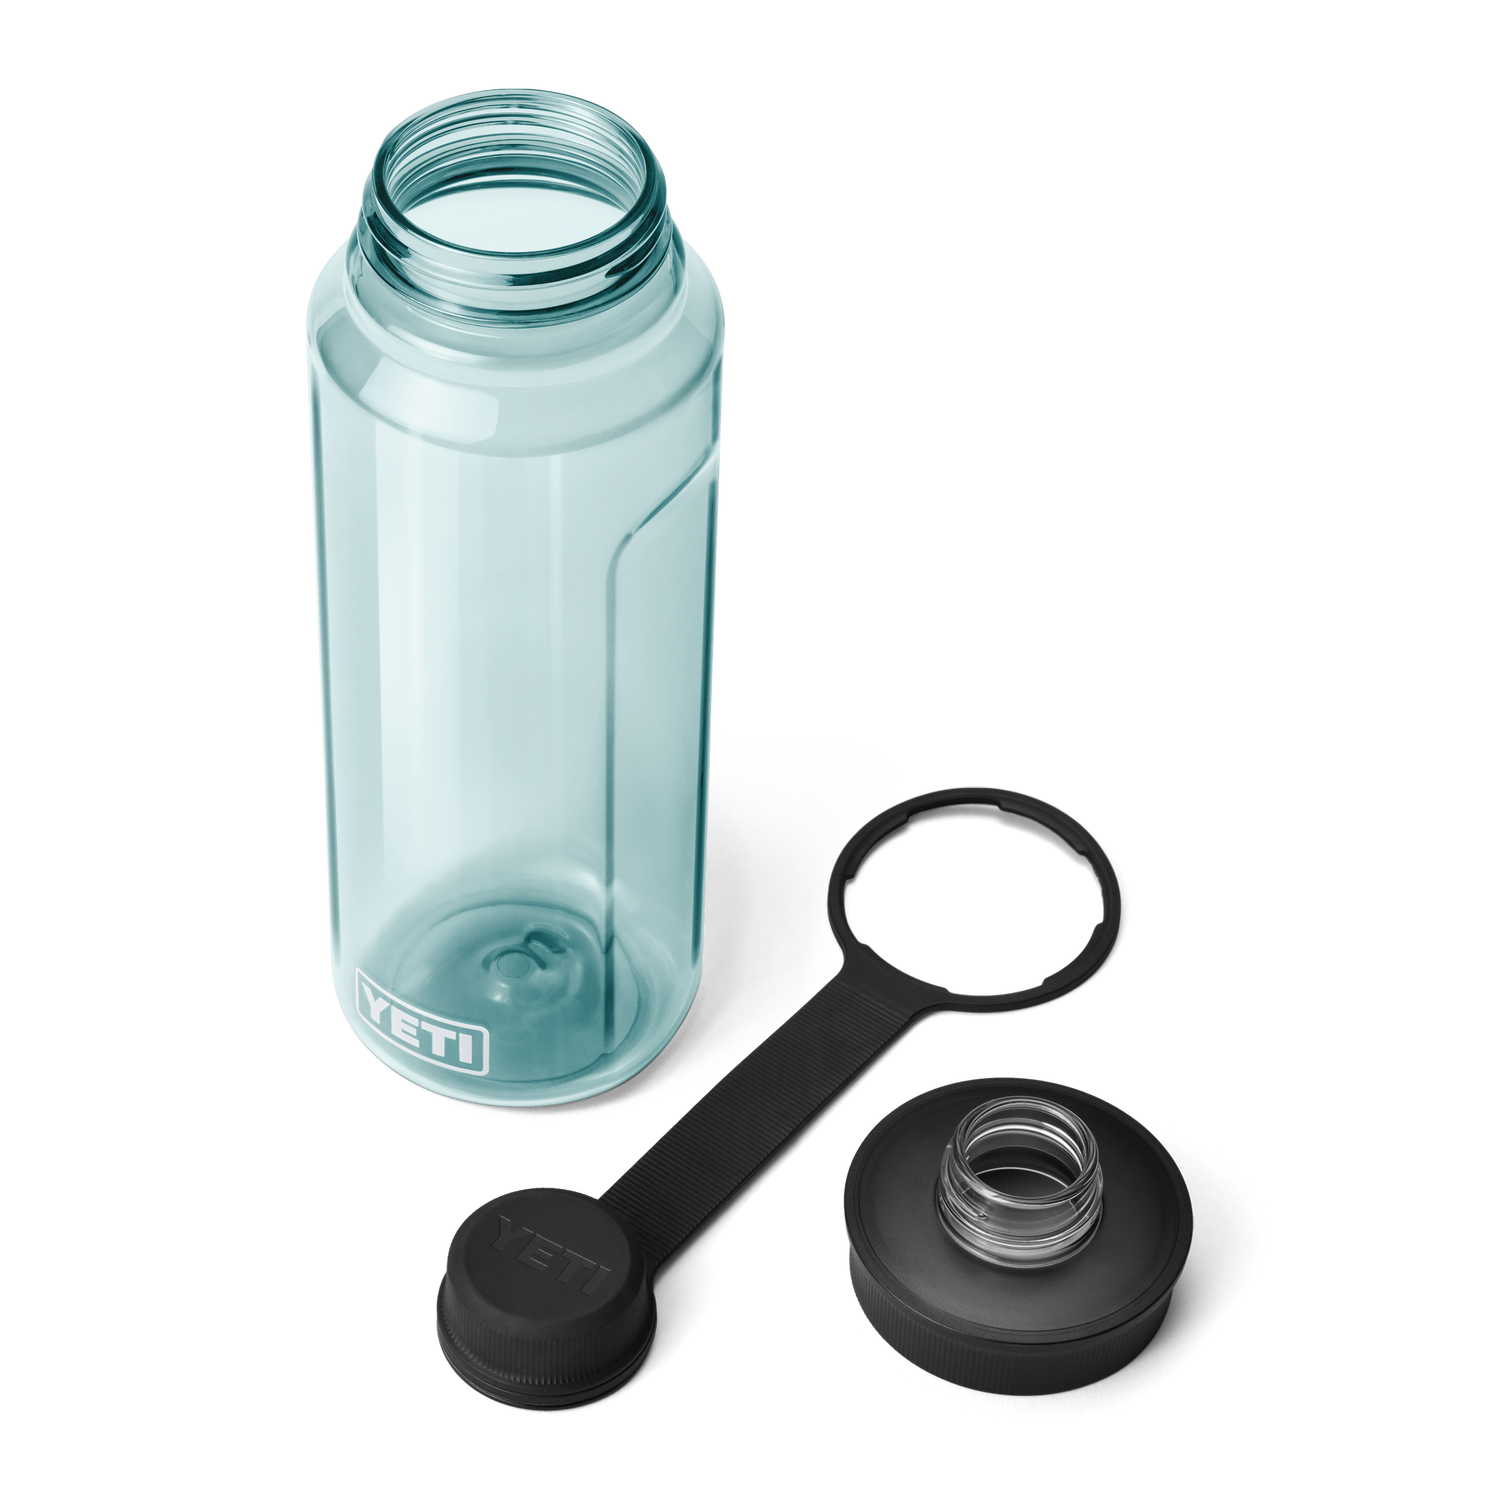 site_studio_Drinkware_Yonder_Tether_Accs_1L_Seafoam_3qtr_Chug_Lid_Off_0888_Primary_B_2400x2400.png